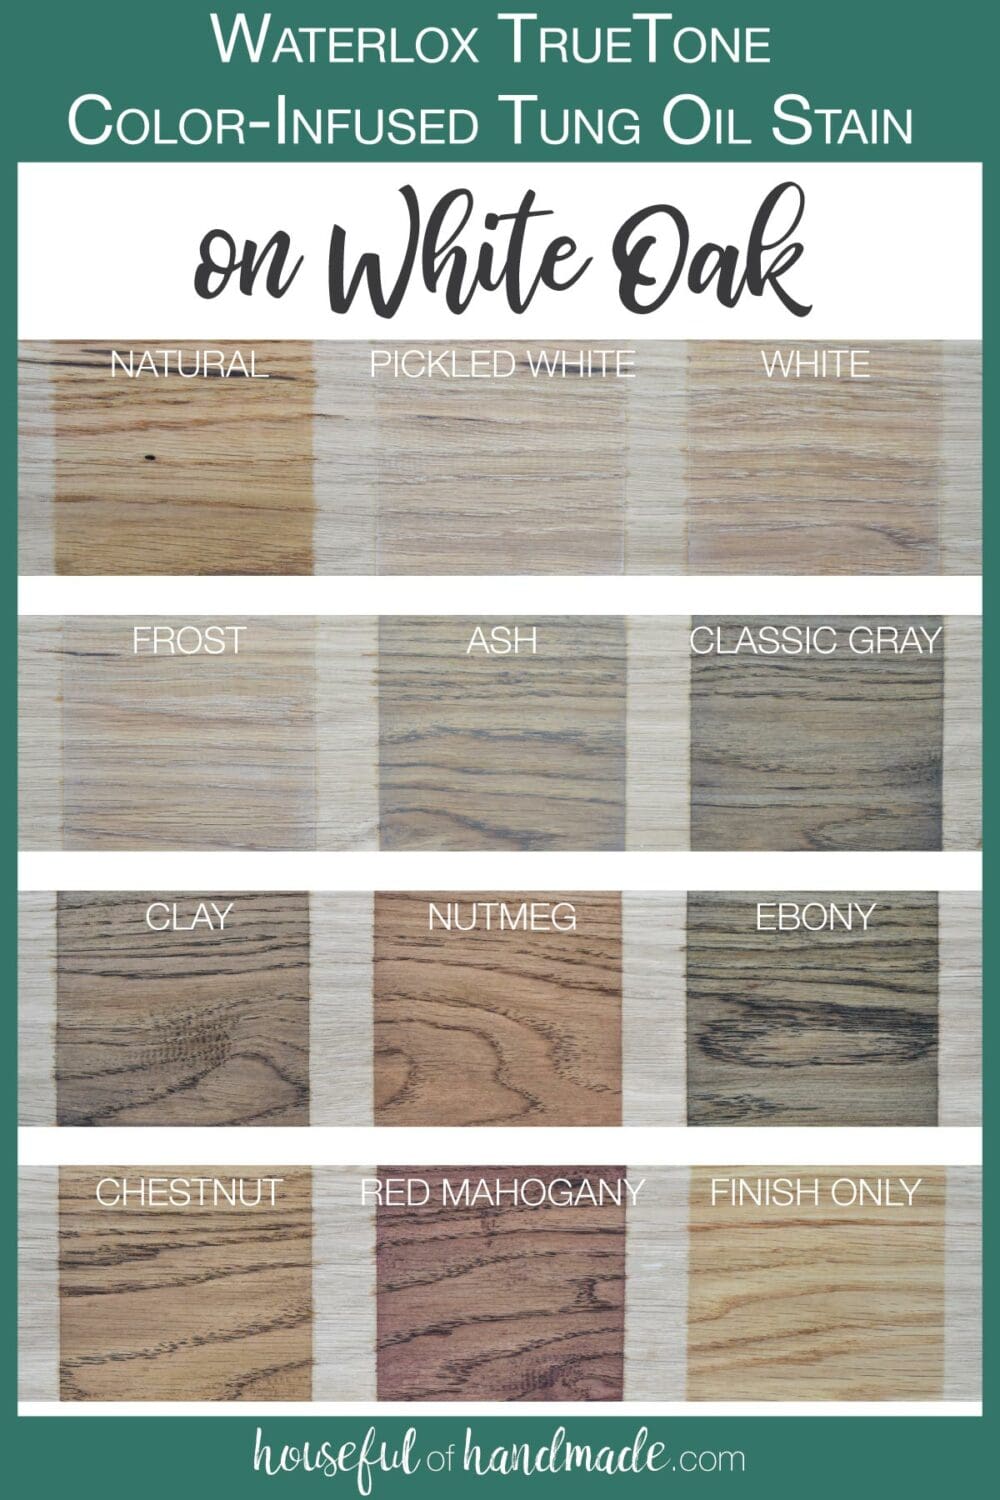 11 colors of the TrueTone color infused tun oil tested on white oak boards. 